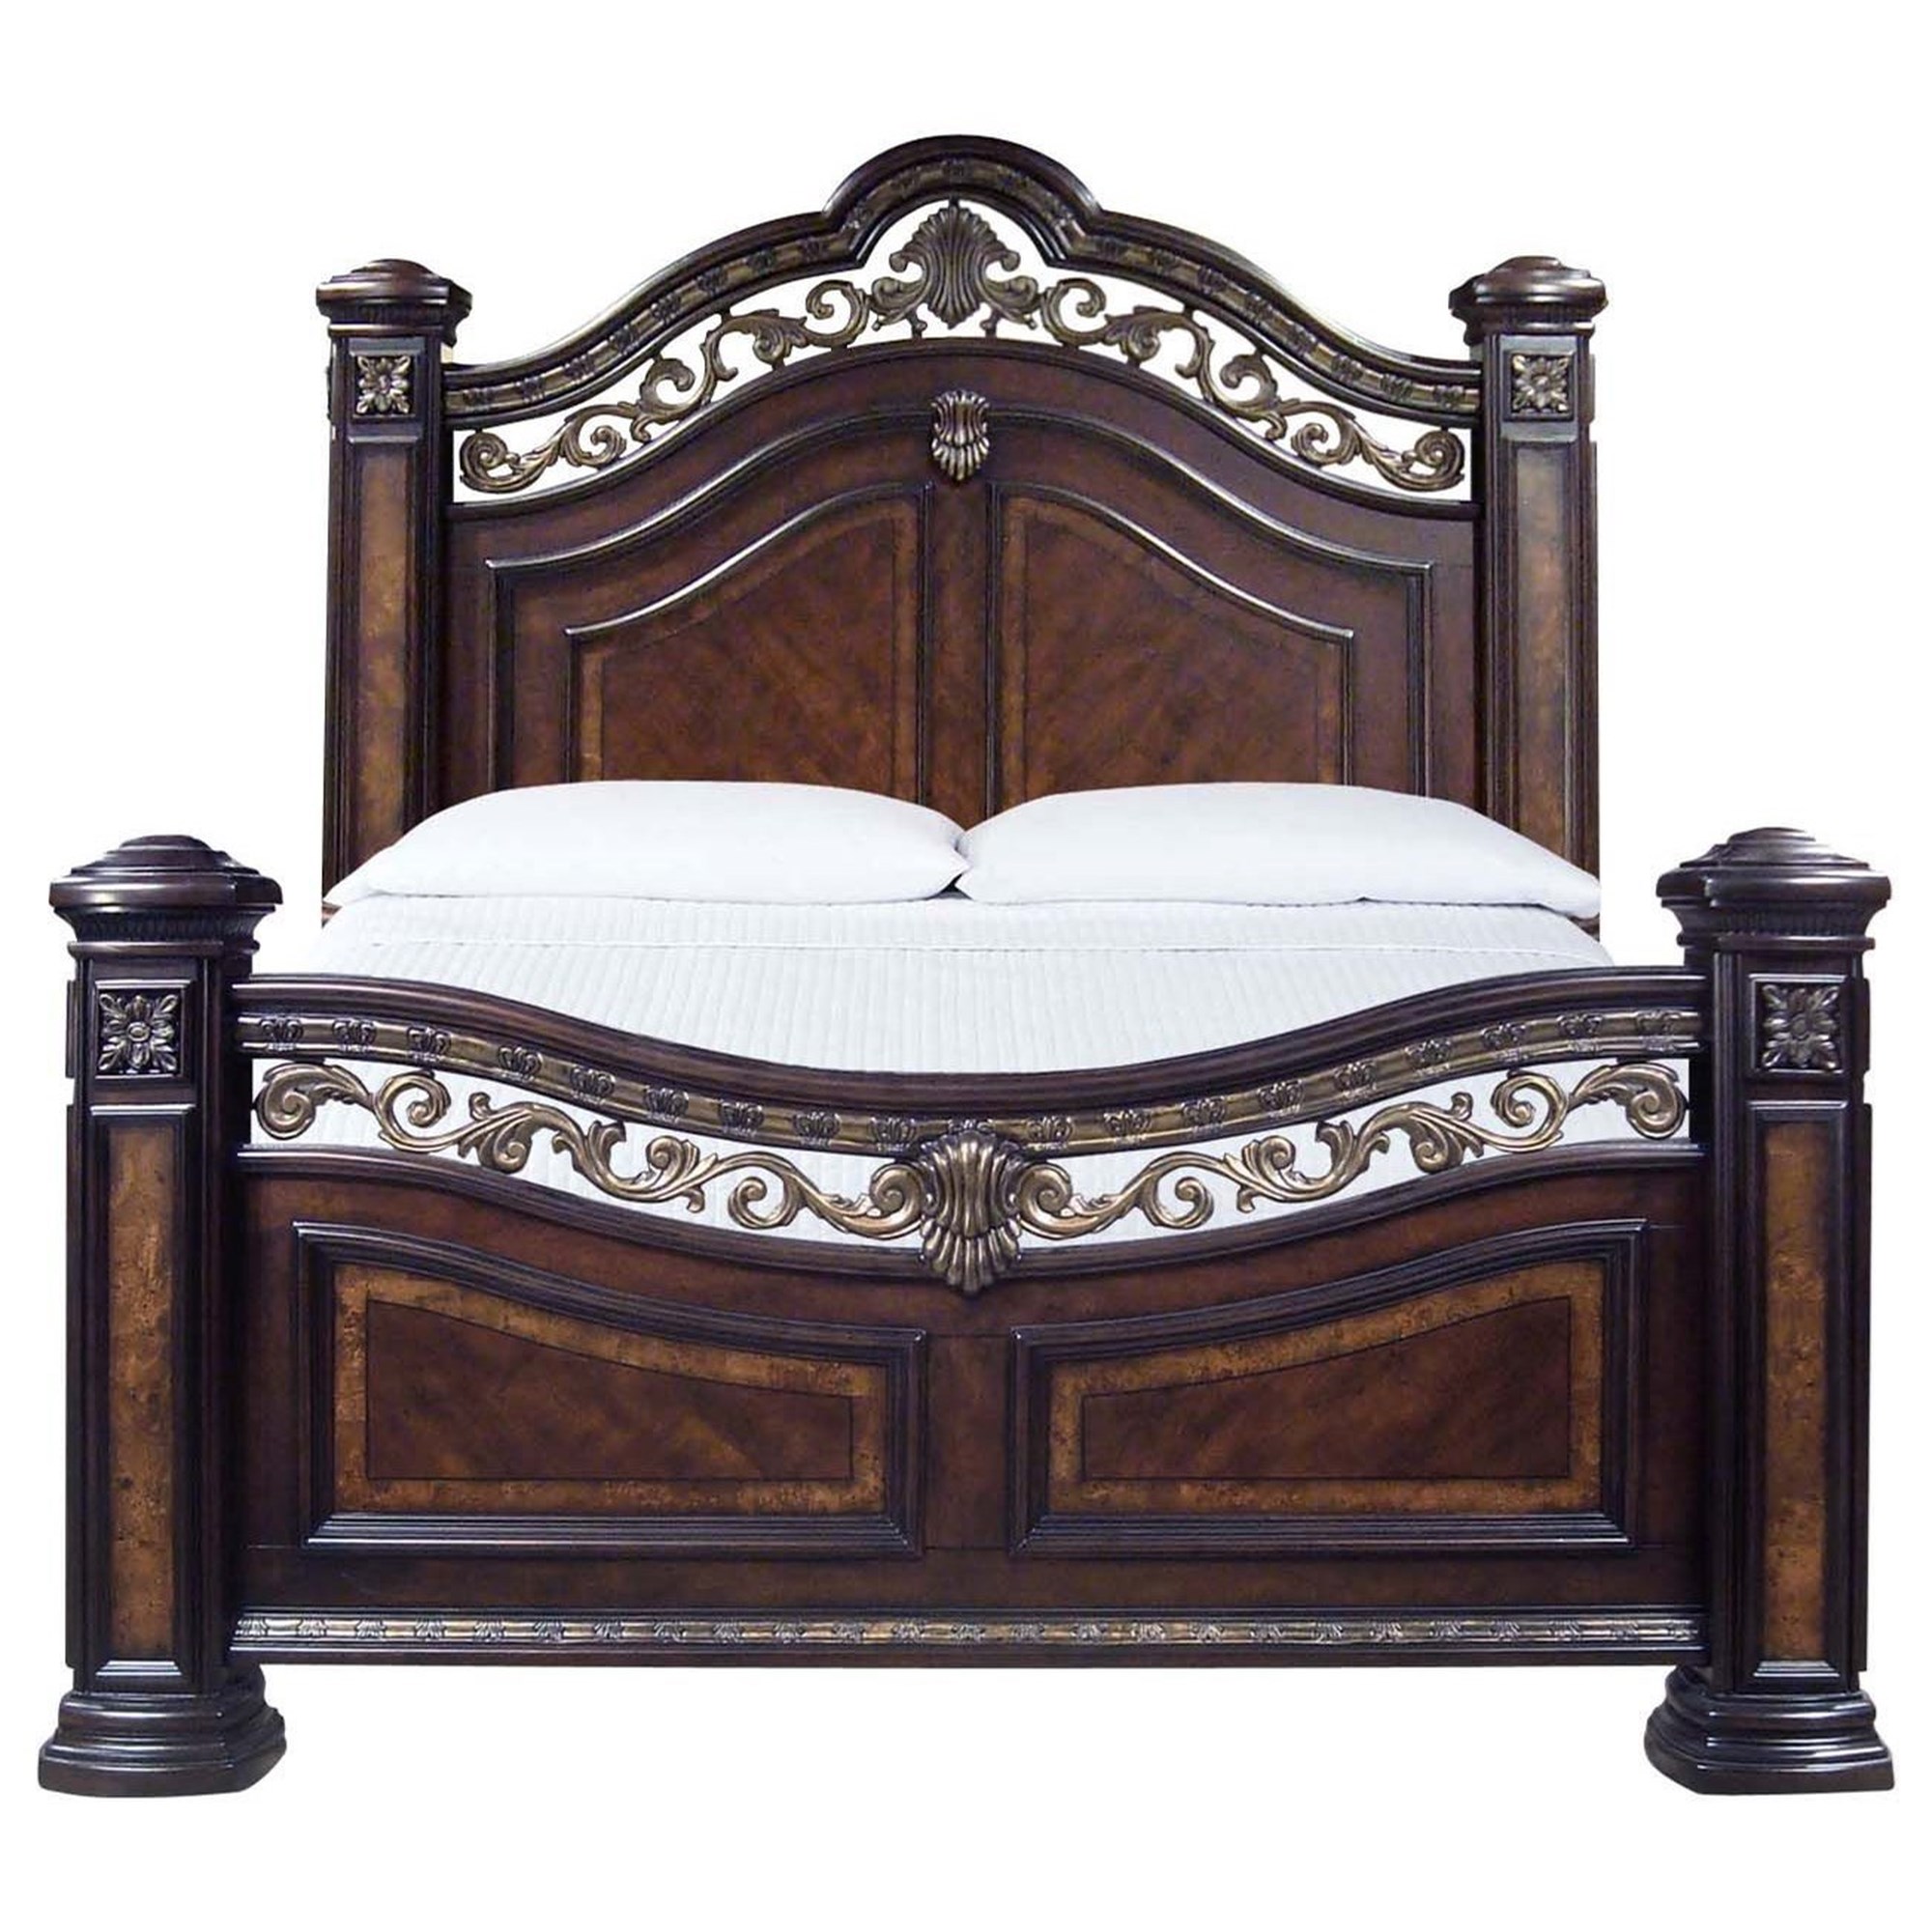 King Size Beds & Bed Frames for sale in Rochester, New York